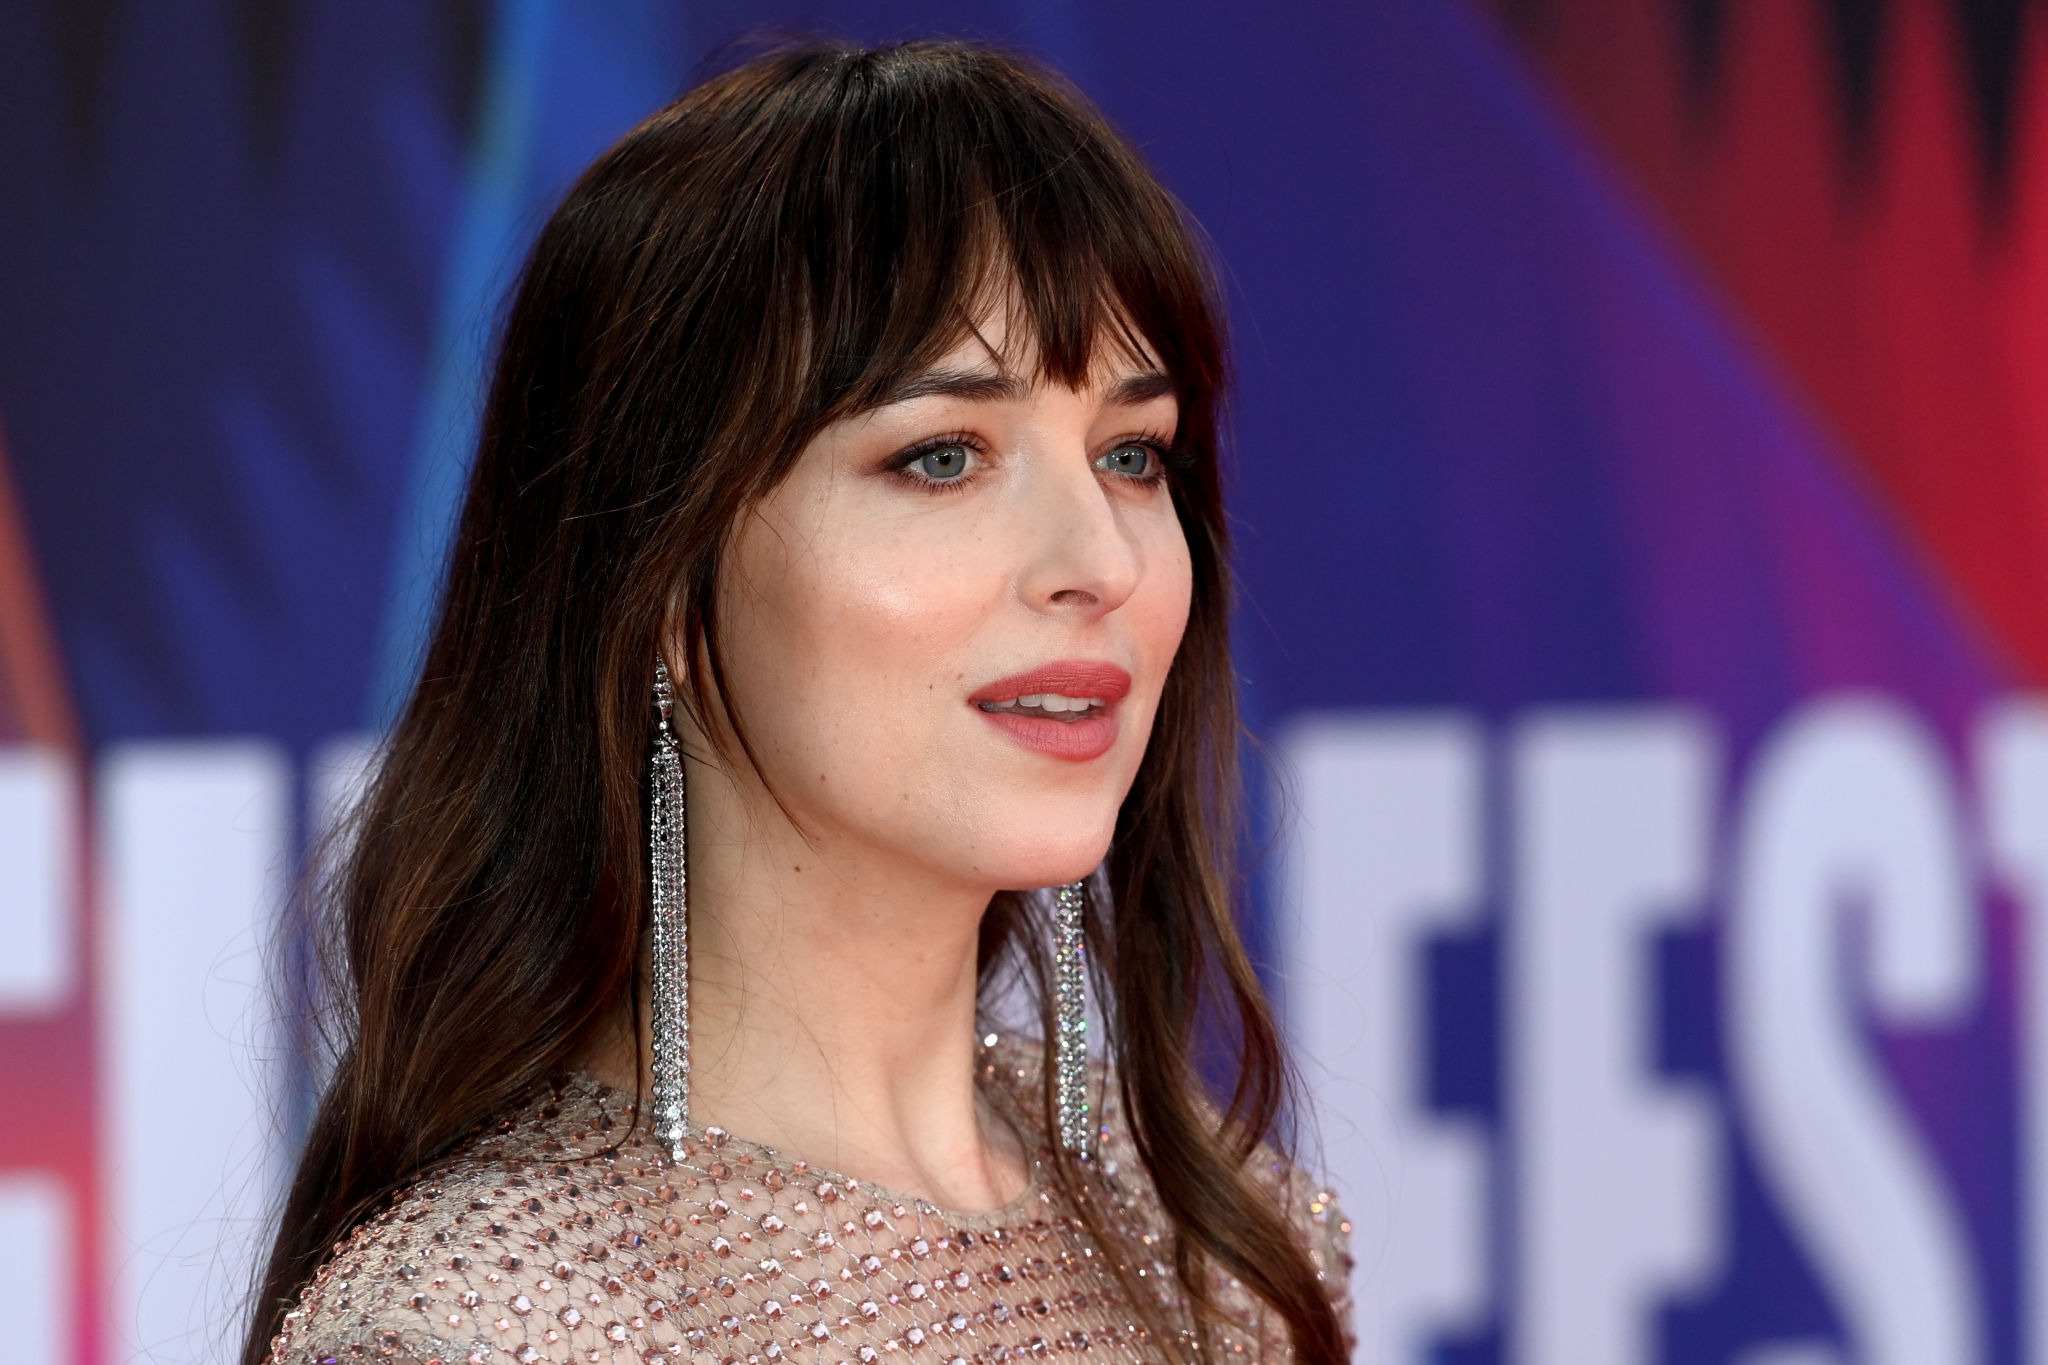 Dakota Johnson at “The Lost Daughter” UK Premiere during the 65th BFI London Film Festival on Oct 13